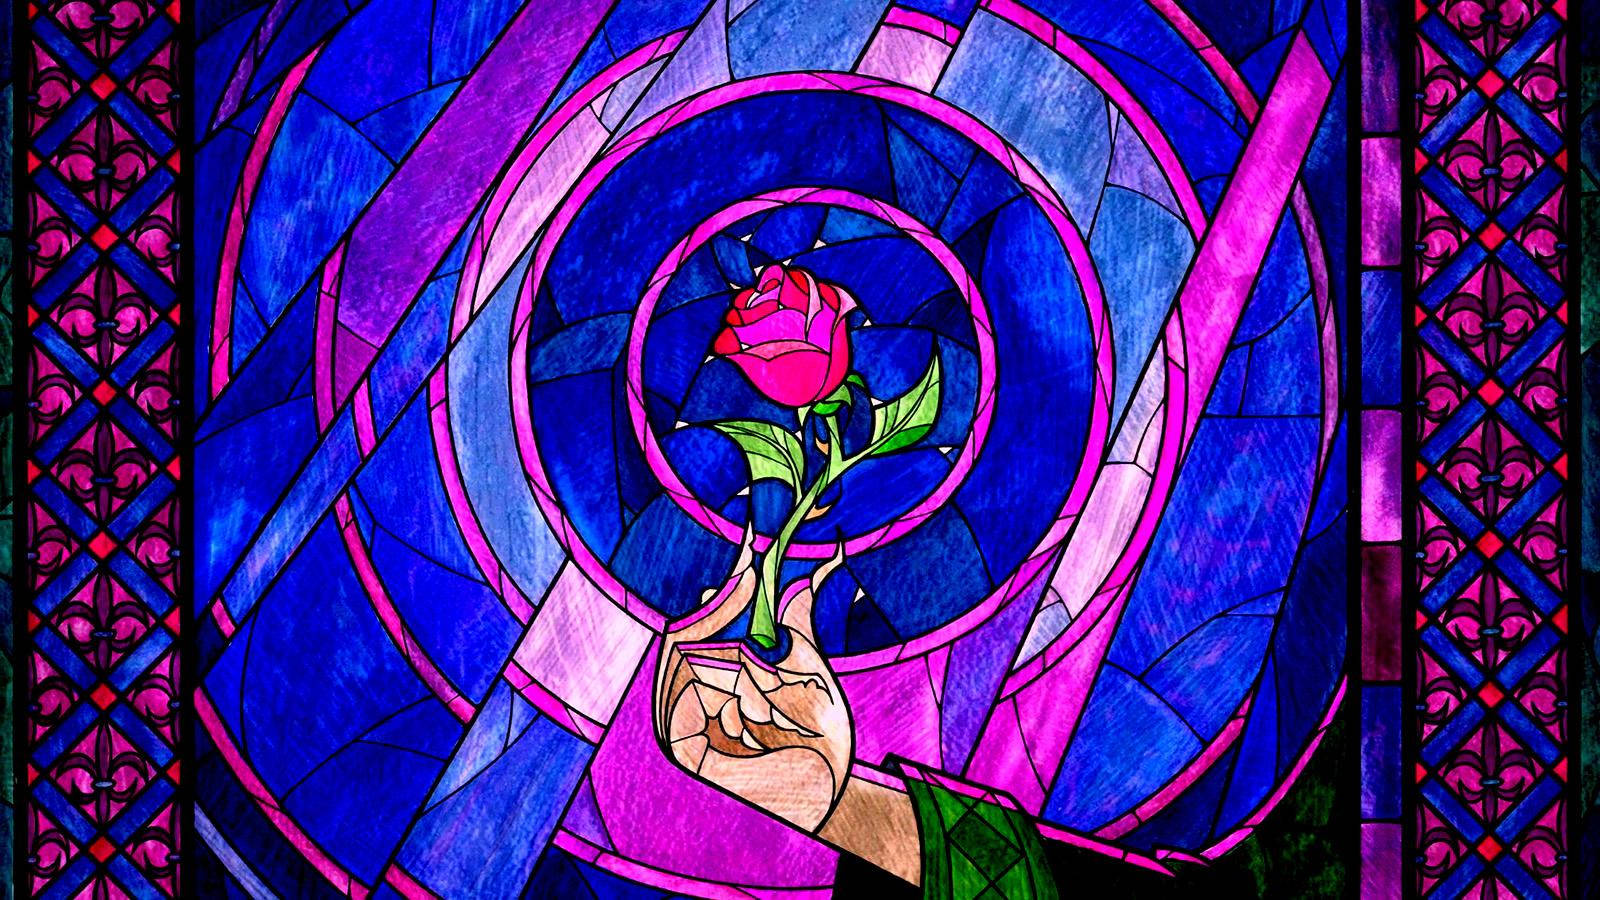 Beauty And The Beast Rose Artwork Wallpaper